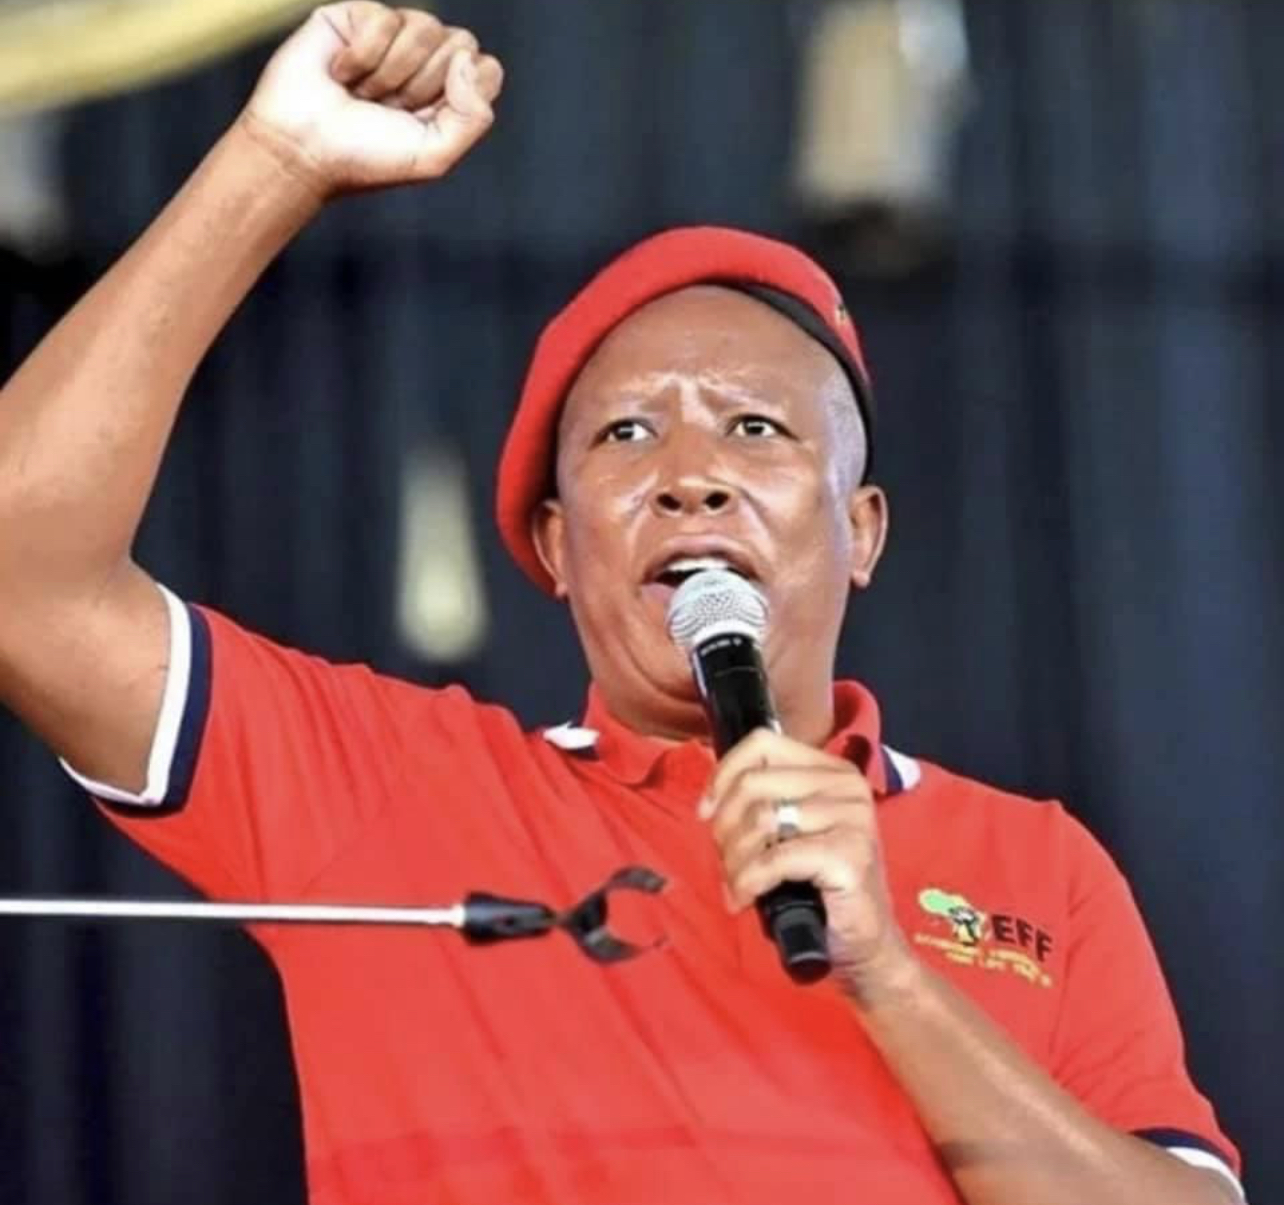  Why King Mswati’s Government fear Julius Malema’s calls for democratic reforms.